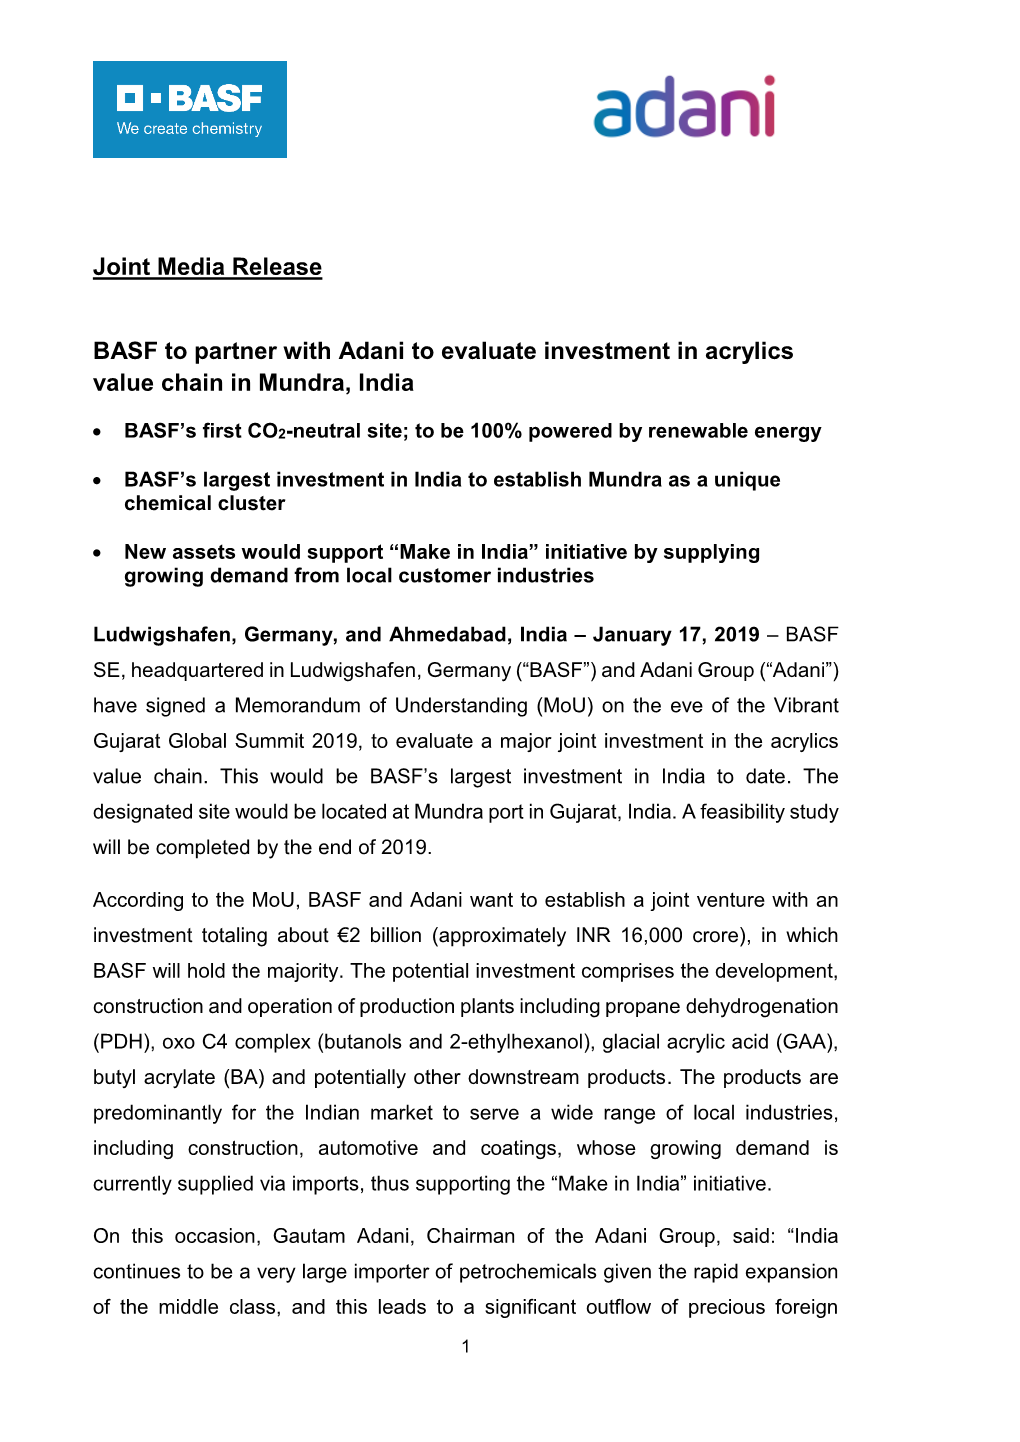 Joint Media Release BASF to Partner with Adani to Evaluate Investment in Acrylics Value Chain in Mundra, India